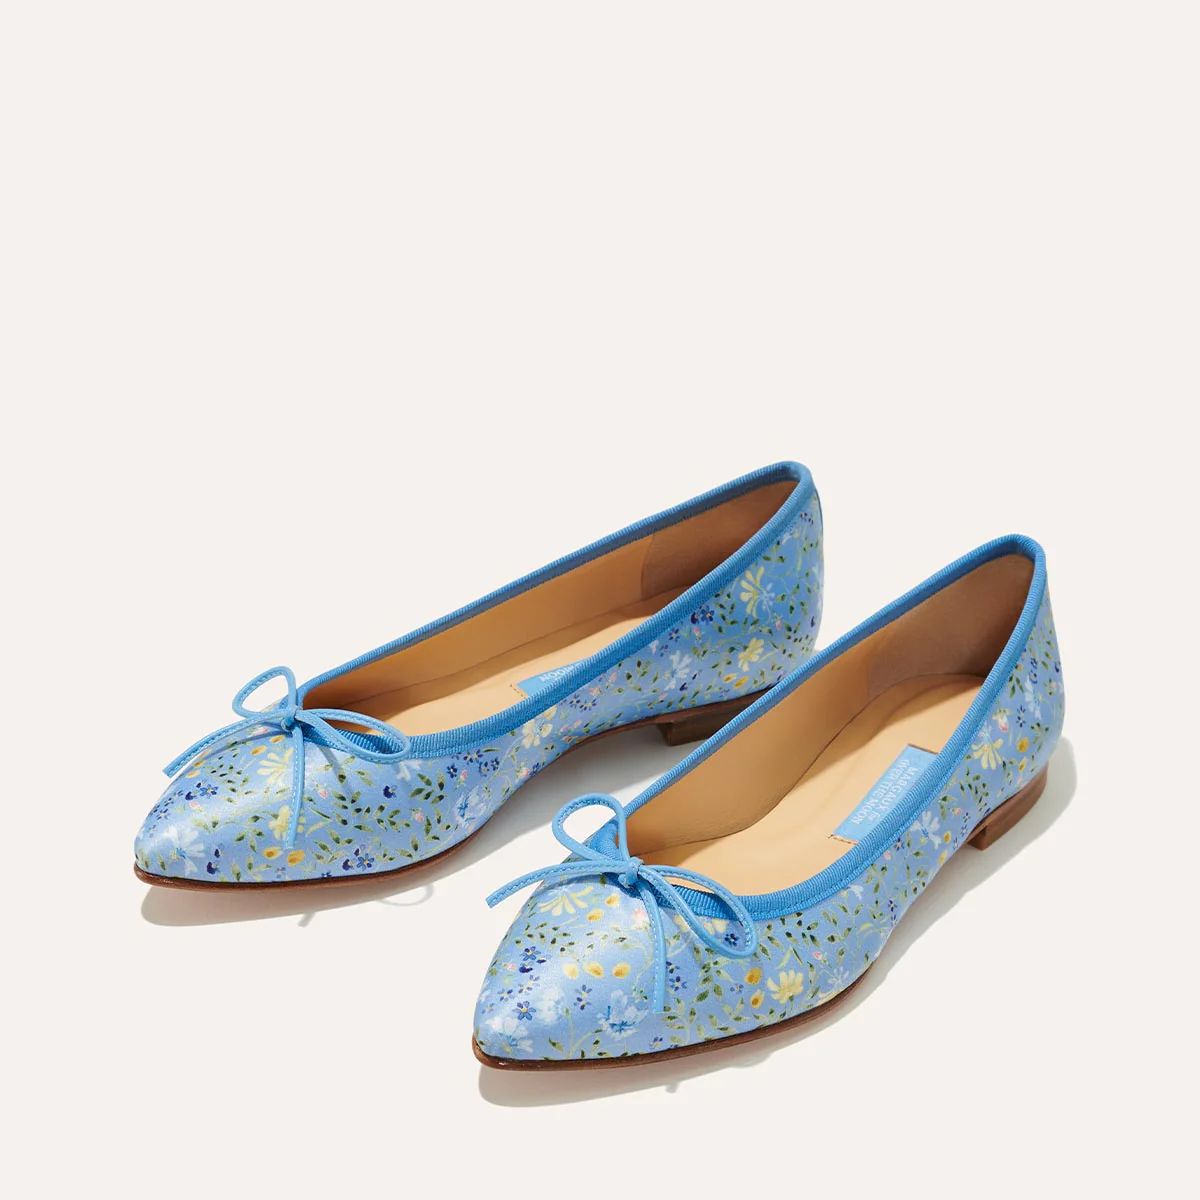 The Pointe - Blue Floral Satin | Margaux